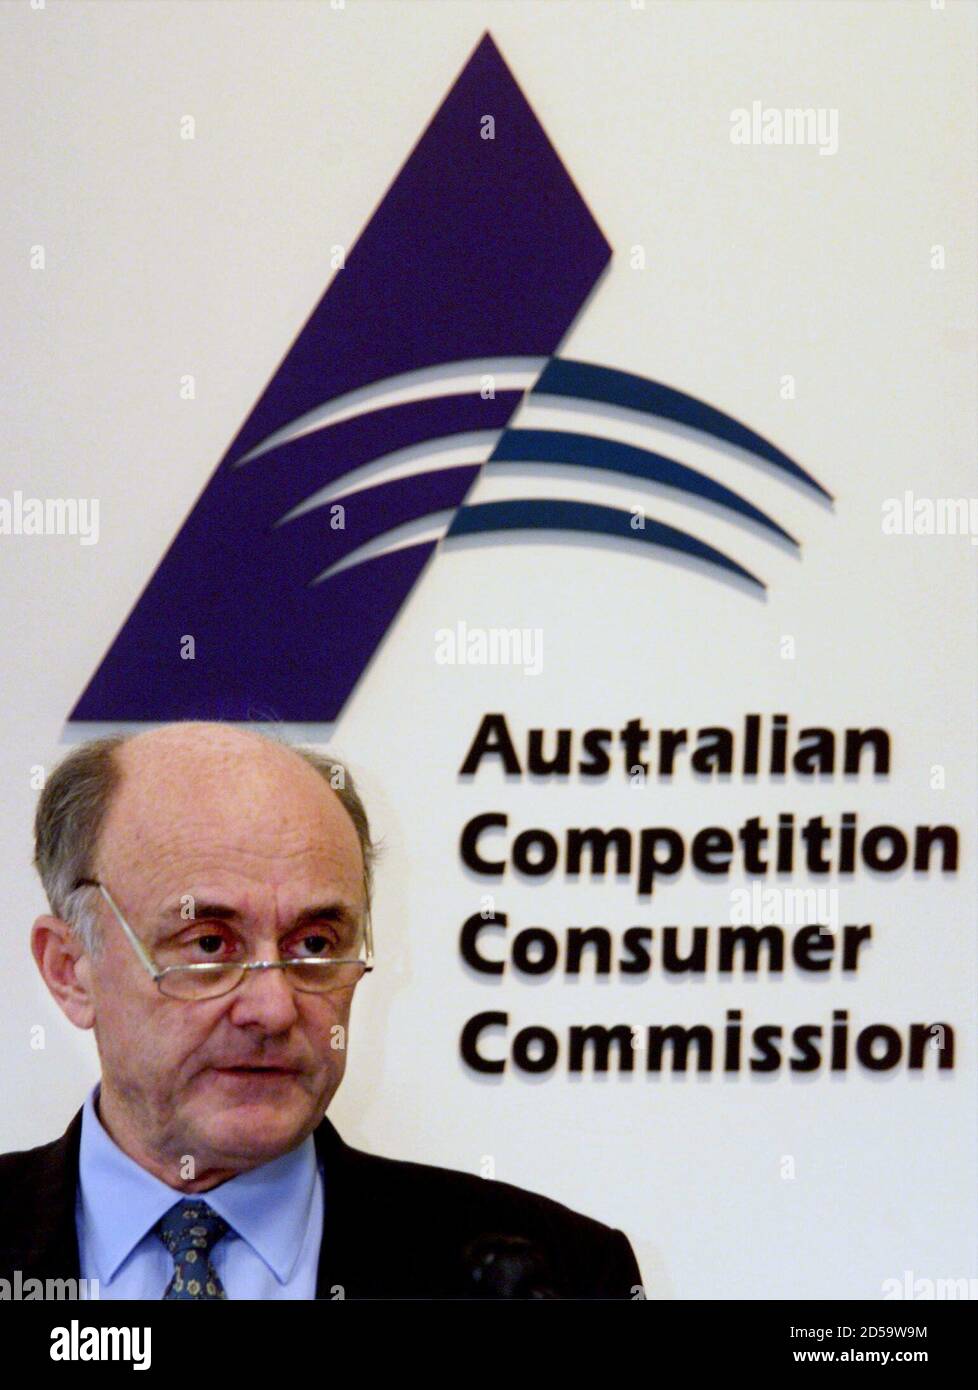 Allan Fels, Chairman of the Australian Competition and Consumer Commission (ACCC) questions during the launch of the book "Fair or Fair Go?" in Melbourne 9. The free government